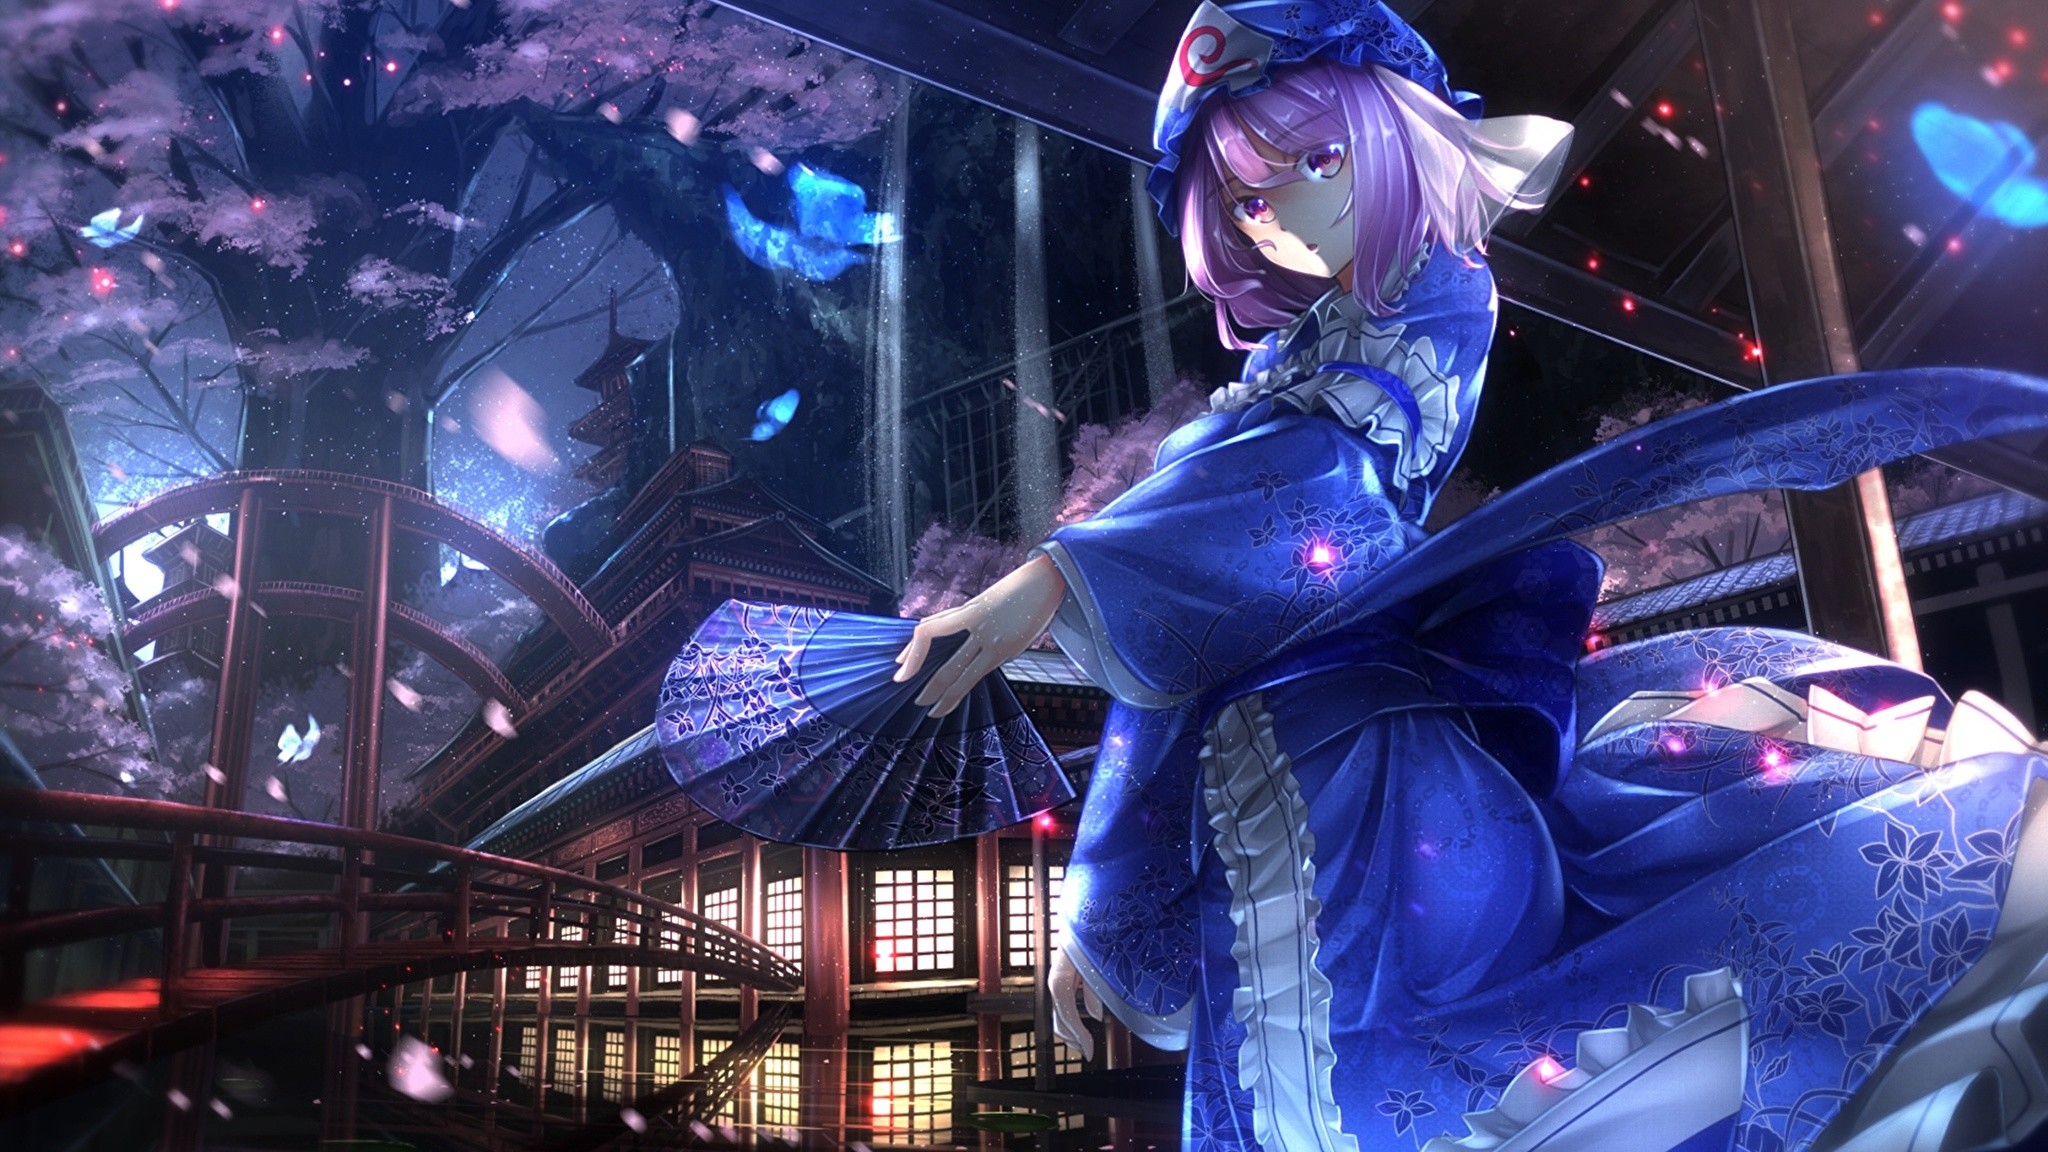 2048x1152 Wallpaper Touhou Collection Girls Anime Glance gown  Staring Dress  frock